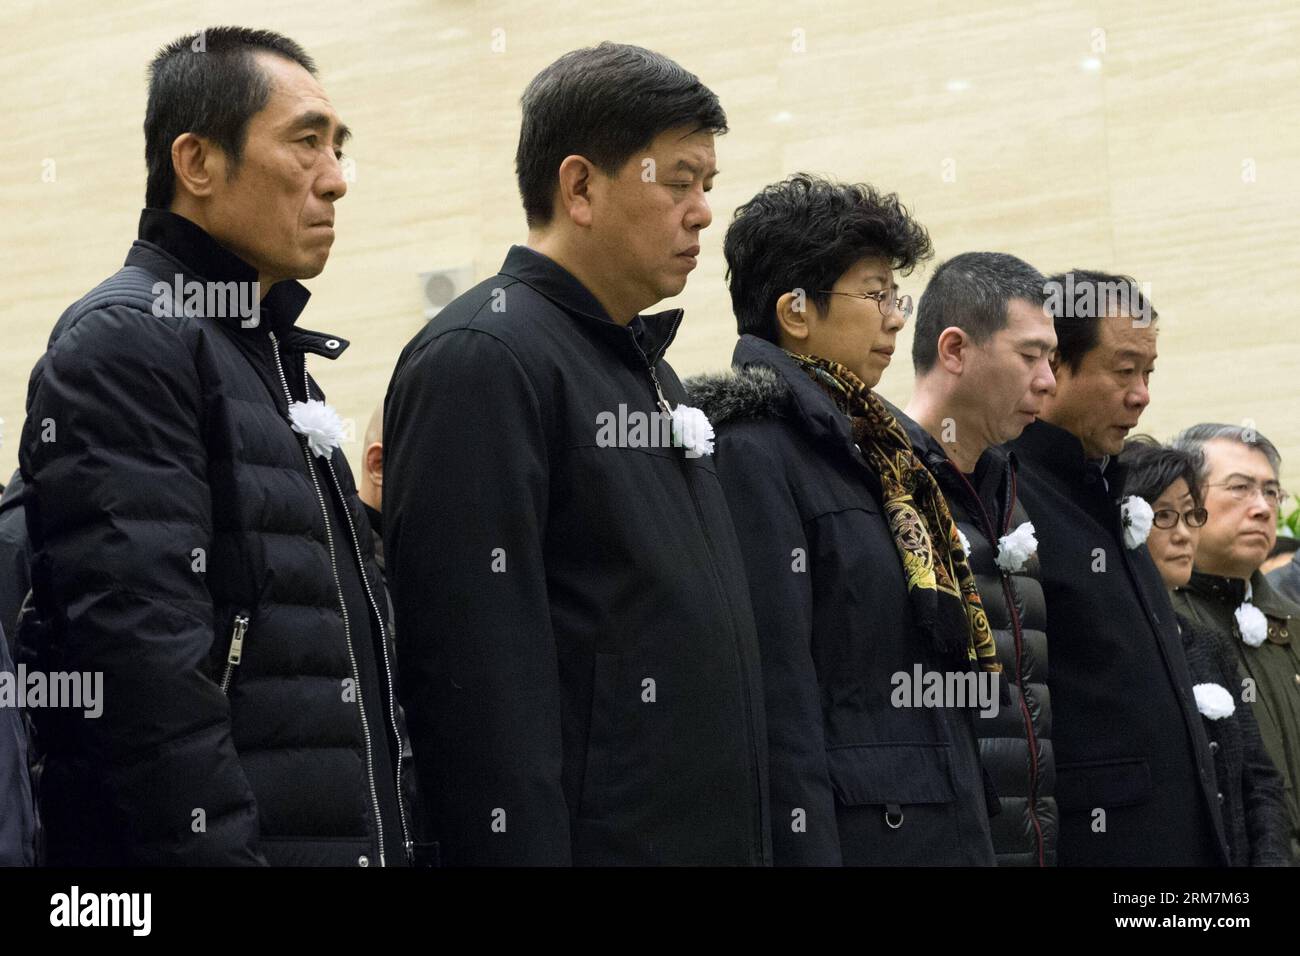 Film directors Zhang Yimou (1st L) and Feng Xiaogang (4th L) mourn for the late film director Wu Tianming at a memorial service held at the Babaoshan Funeral Home in Beijing, capital of China, March 8, 2014. Wu Tianming, who died of a heart attack on March 4 at the age of 75, was a leading figure of China s Fourth Generation film directors. While he was head of the renowned Xi an Film Studio, Wu spotted talents such as Zhang Yimou and Gu Changwei who later became representatives of China s Fifth Generation film directors. His major works include Old Well and Life . (Xinhua/Wu Kaixiang) (lmm) C Stock Photo